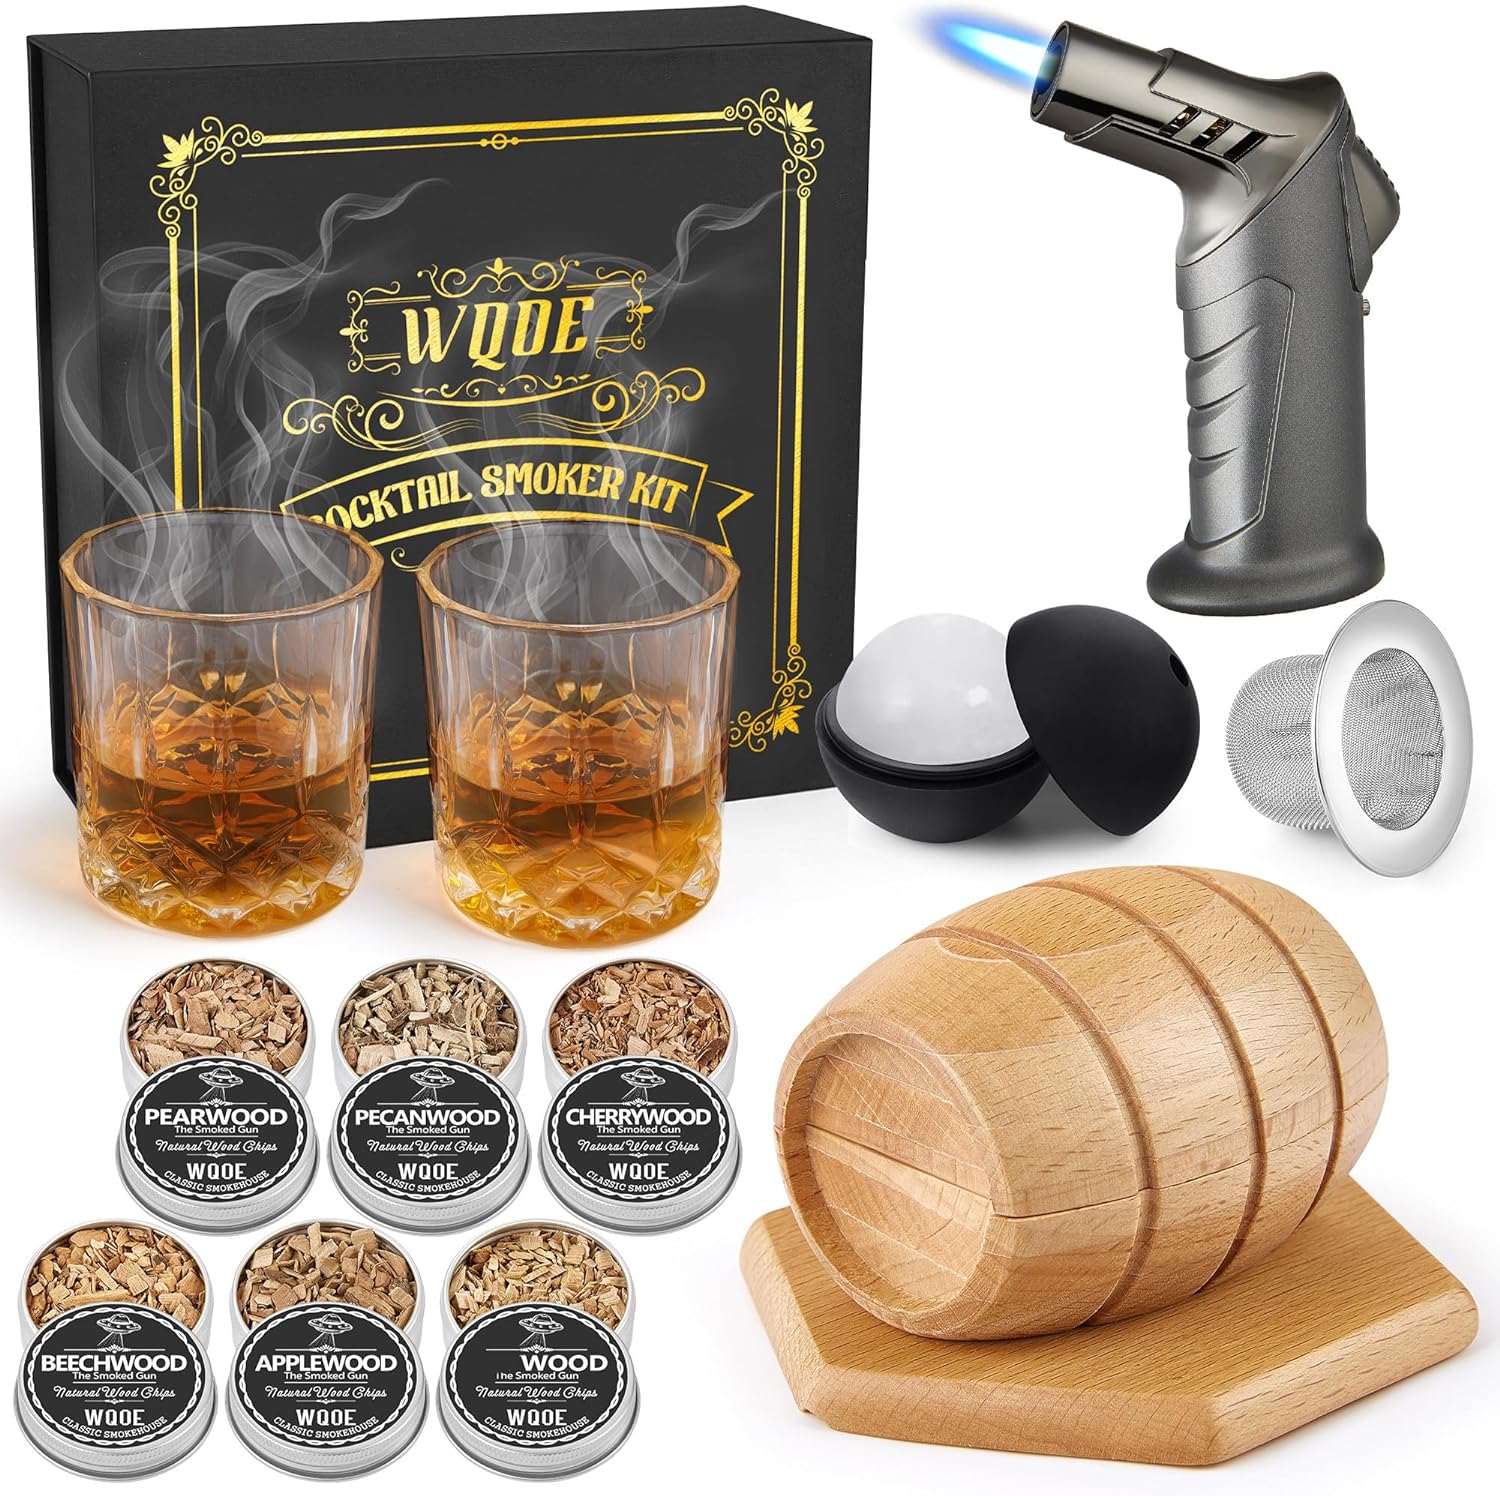 Whiskey Smoker Kit with Torch - 6 Flavors Wood Chips, 2 Glasses, 2 Ball Ice Trays, Old Fashioned Drink Smoker Kit, Birthday Bourbon Whiskey Gifts for Men,Dad(NO Butane)